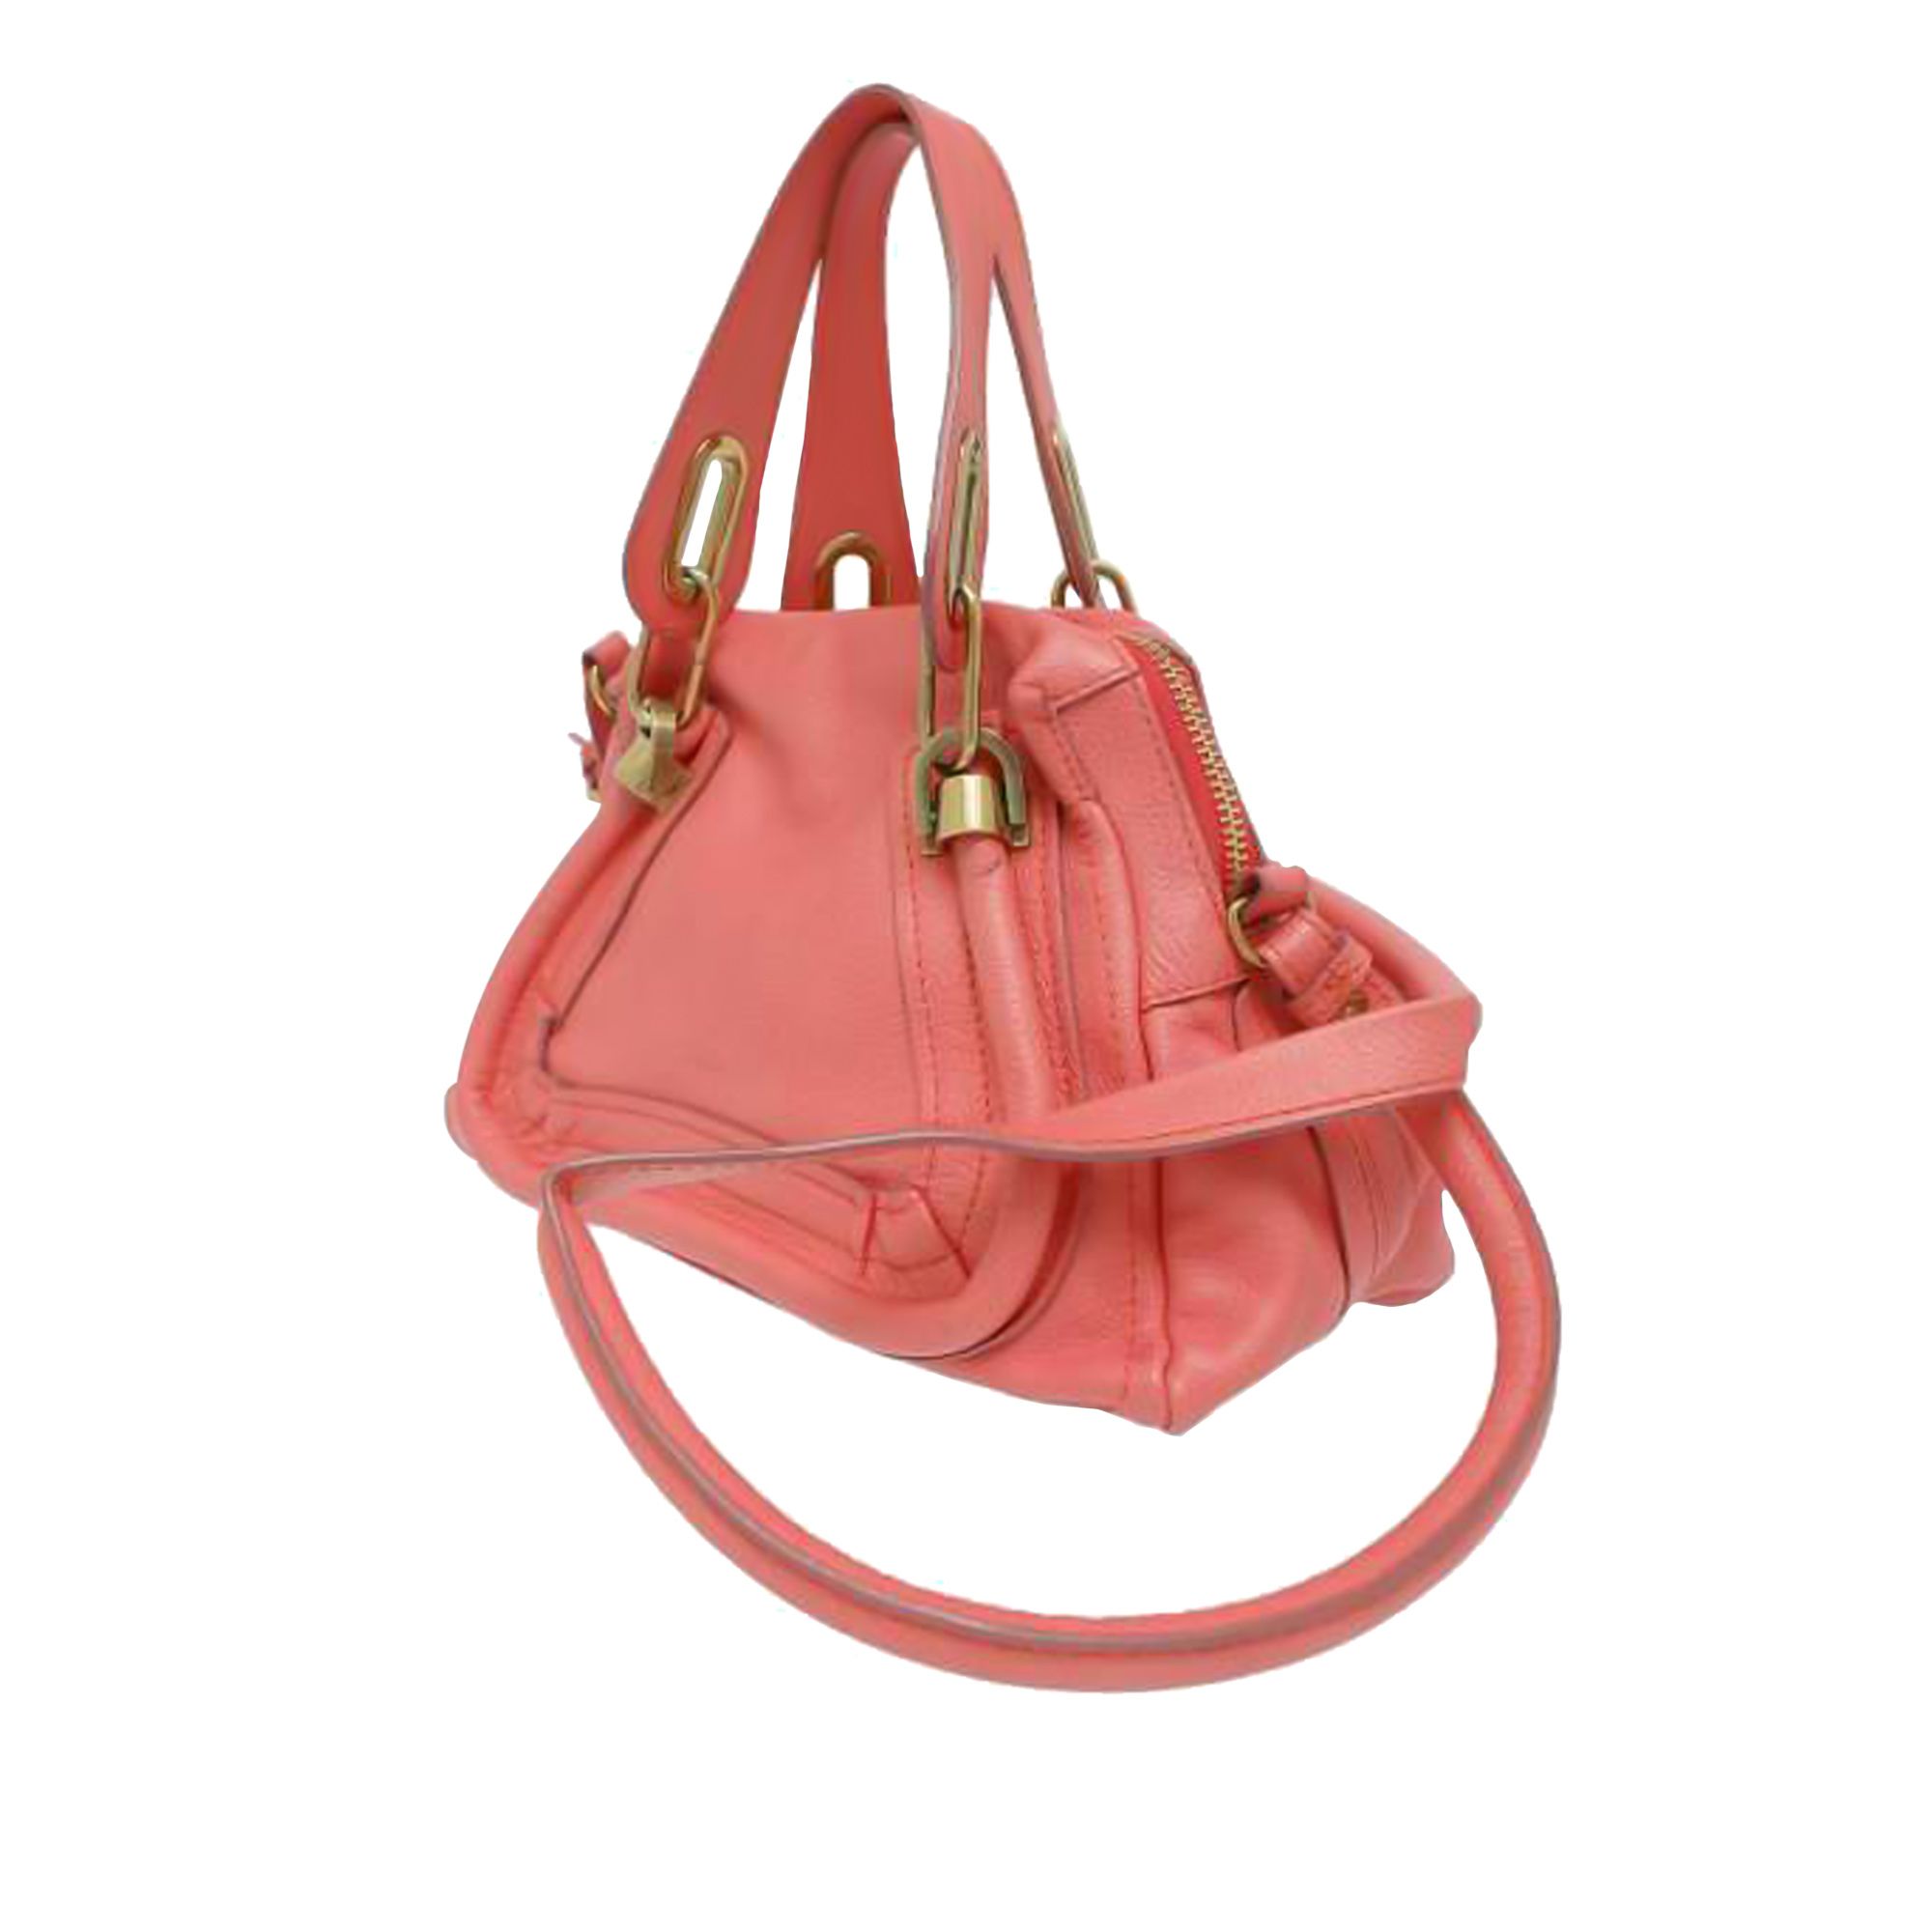 VINTAGE. RRP AS NEW. The Paraty satchel features a leather body, flat leather handles, a detachable rolled leather strap, a top zip closure, and an interior zip and slip pockets.
Dimensions:
Length 21cm
Width 29cm
Depth 12cm
Hand Drop 15cm
Shoulder Drop 40cm

Original Accessories: Dust Bag

Color: Pink
Material: Leather x Calf
Country of Origin: France
Boutique Reference: SSU105621K1342


Product Rating: GoodCondition